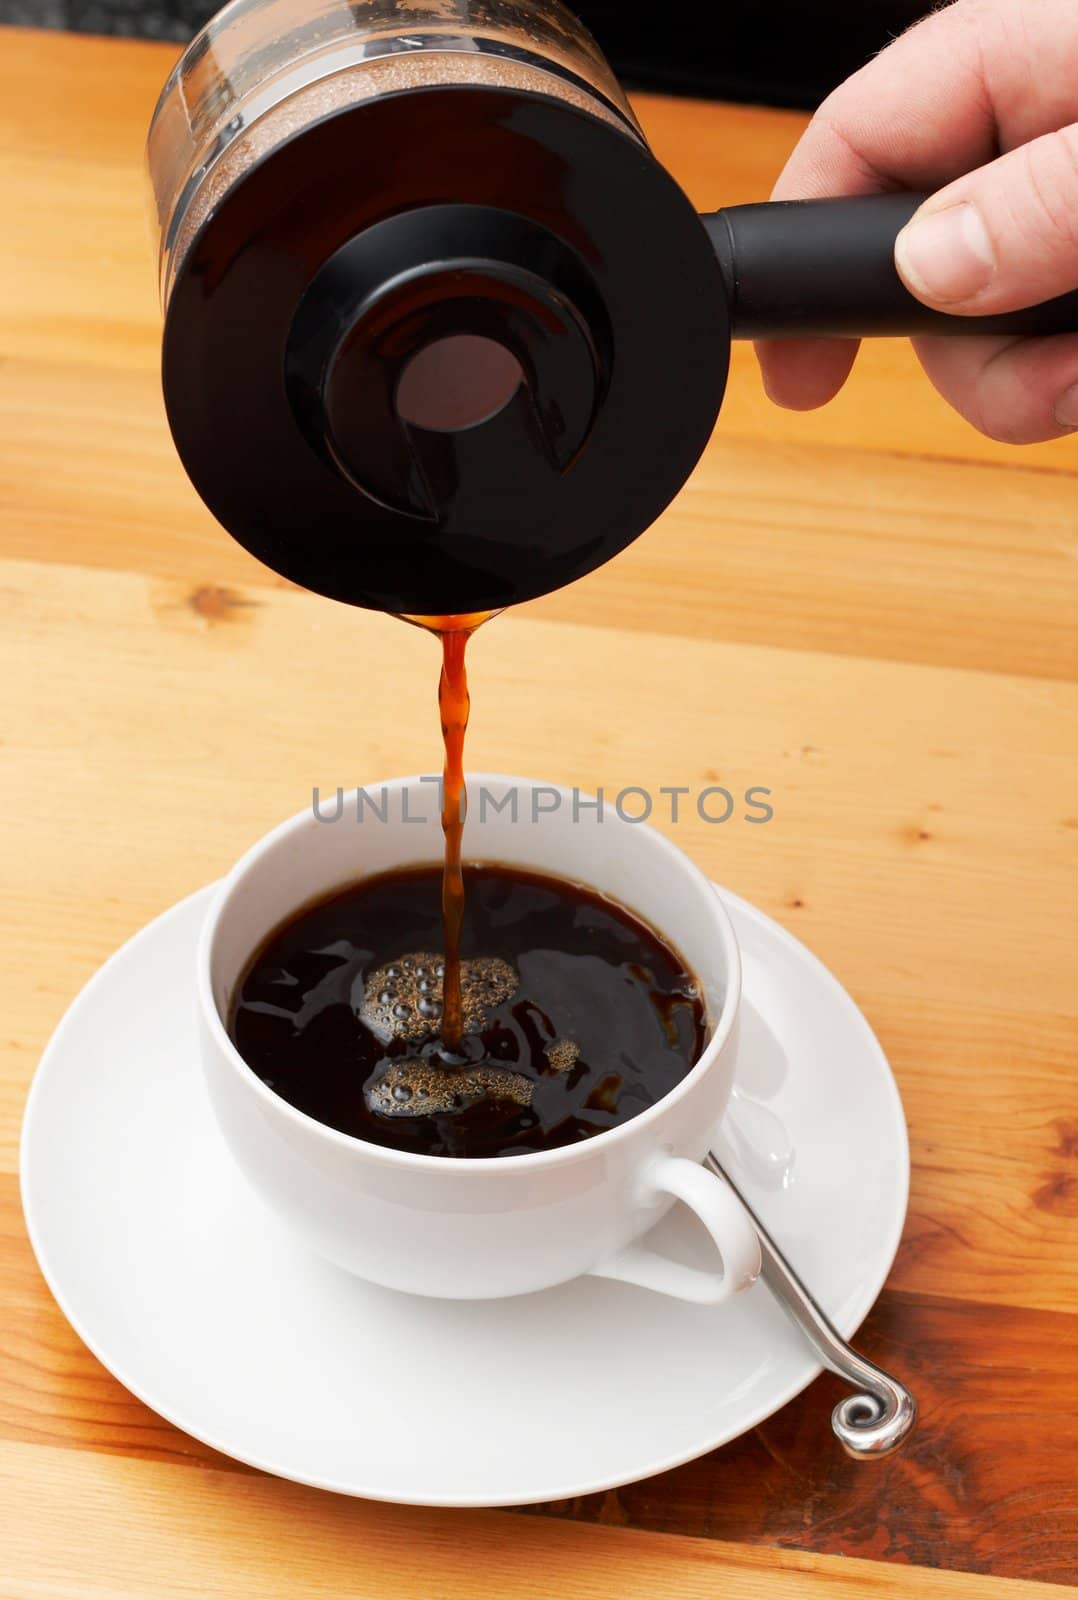 Closeup of coffee being poured from the pot into the cup. Shot on light wood background